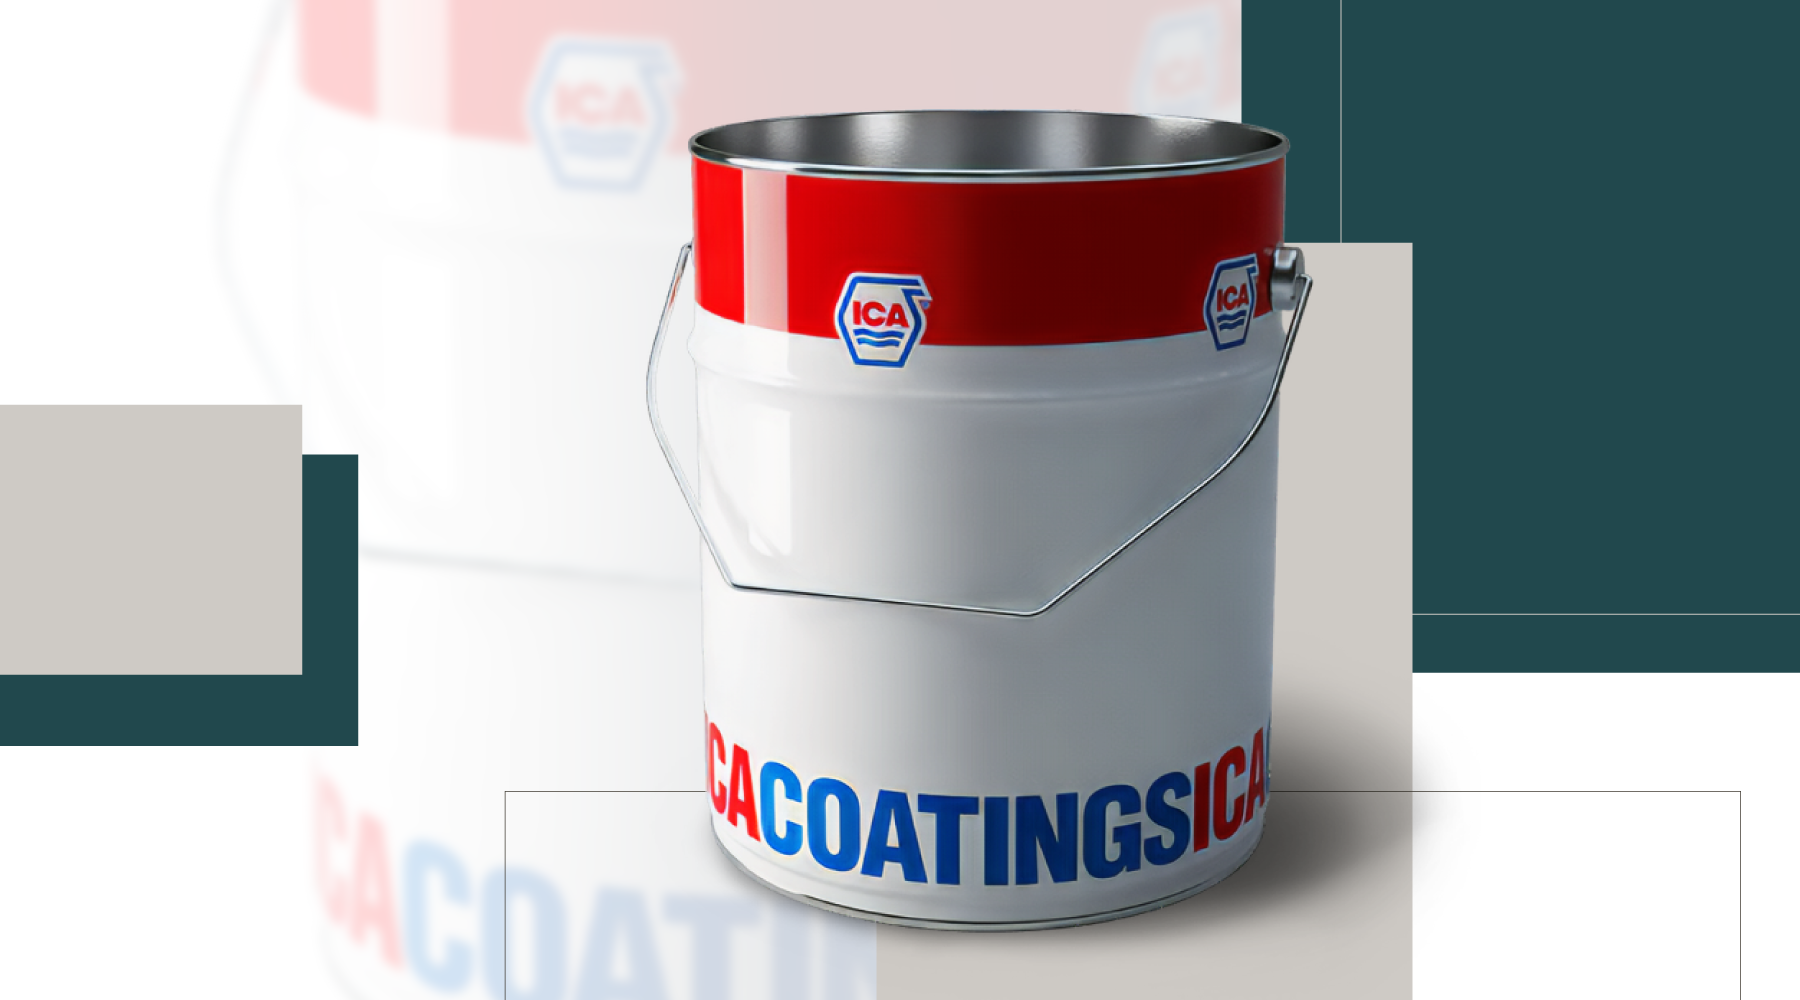 ICA Coatings: Fast Access to Industrial Specialty Coating Products